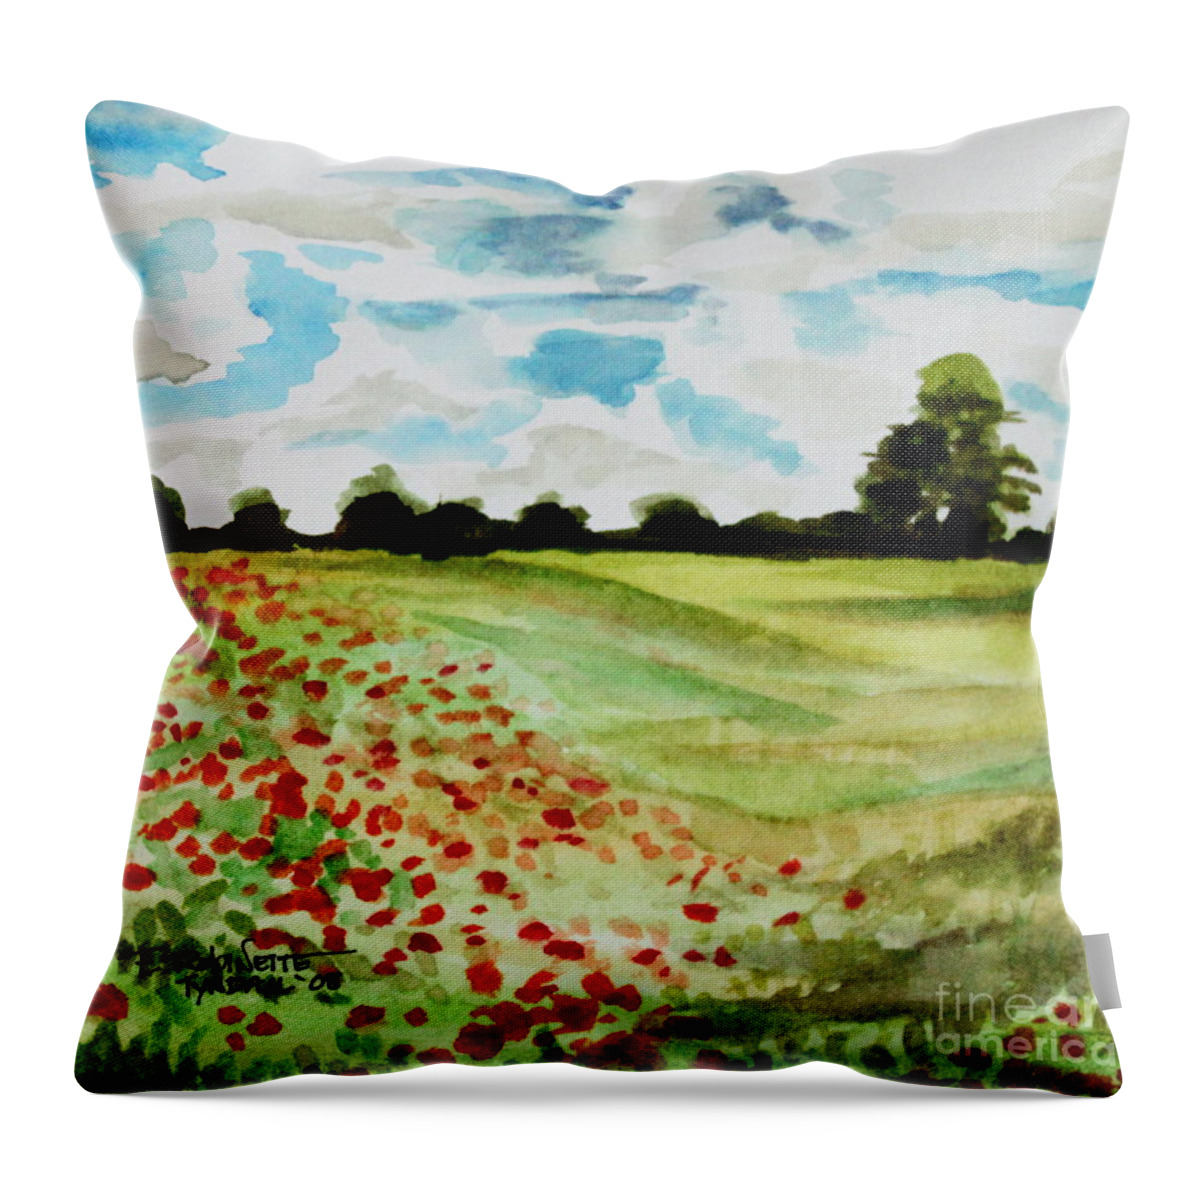 Landscape Throw Pillow featuring the painting Poppy Meadow by Elizabeth Robinette Tyndall